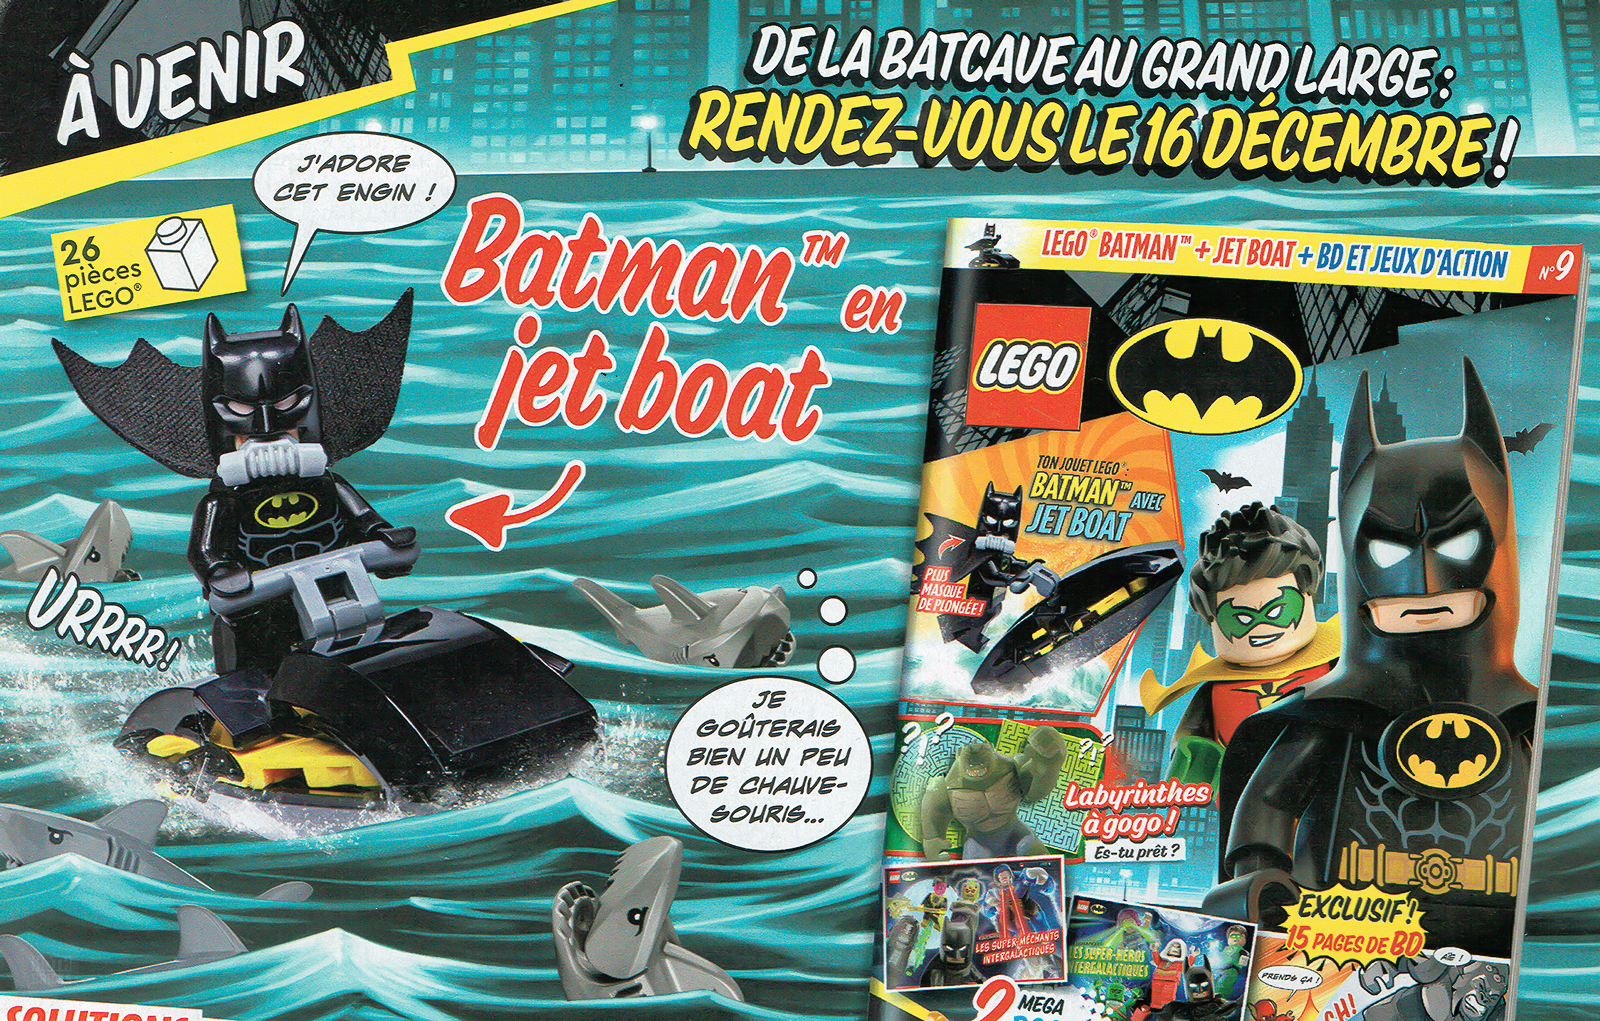 On newsstands: The September 2022 issue of the official LEGO Batman magazine